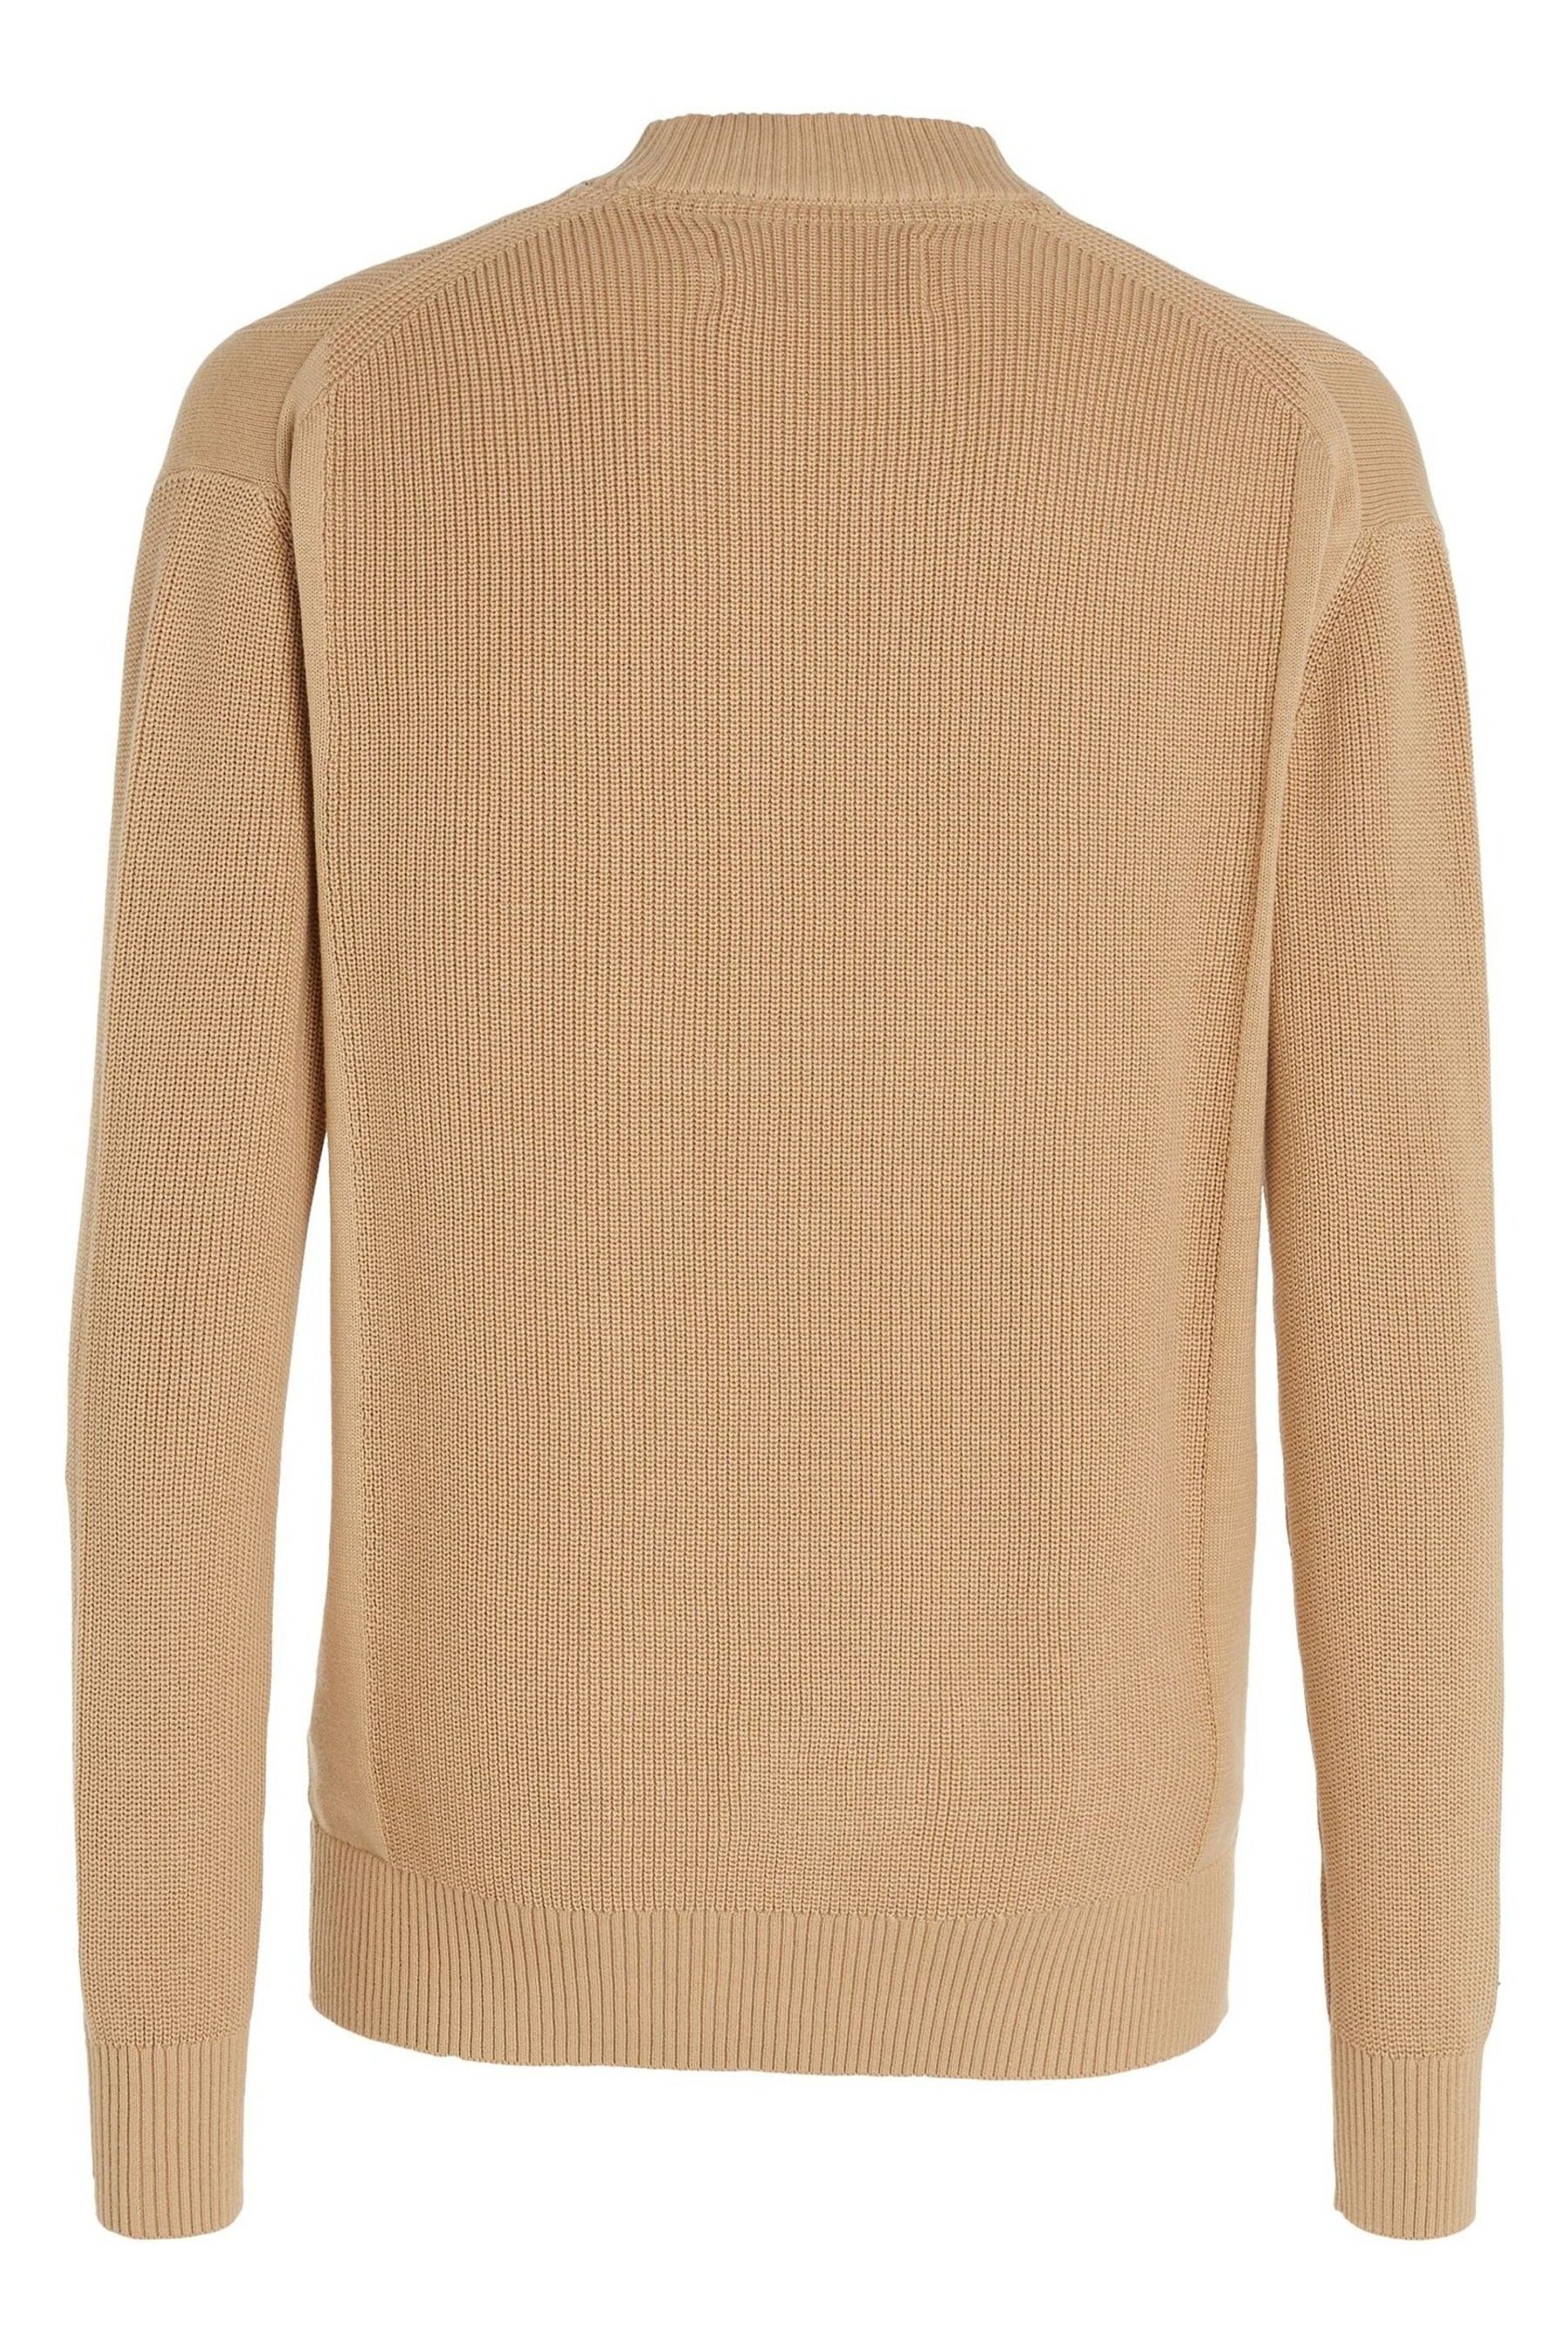 Calvin Klein Jeans Monologo Natural Sweater - Image 5 of 6